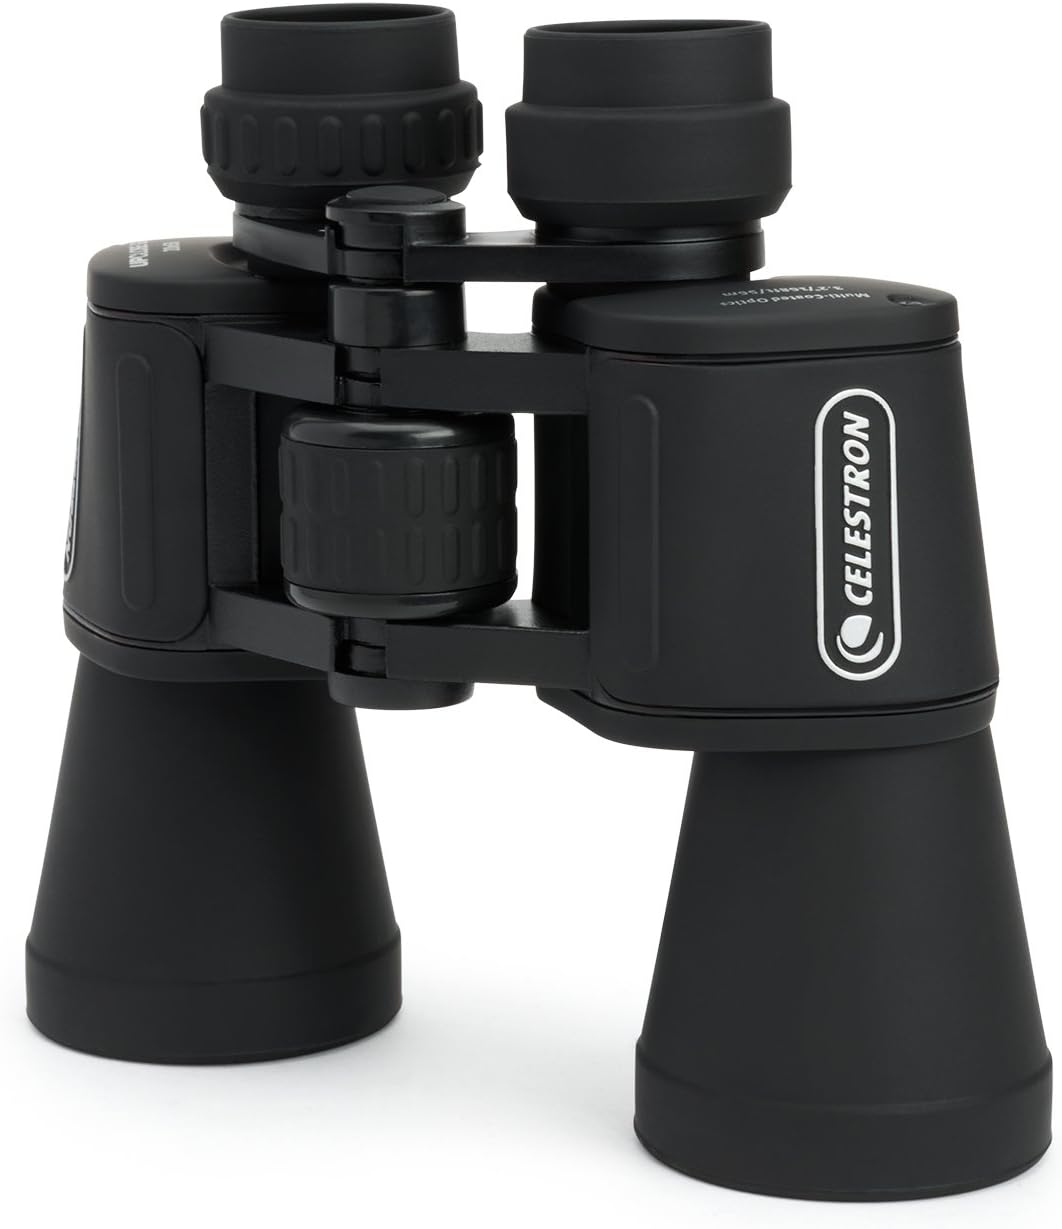 Celestron – UpClose G2 20x50 Porro Binoculars with Multi-Coated BK-7 Prism Glass – Water-Resistant Binoculars with Rubber Armored and Non-Slip Ergonomic Body for Sporting Events